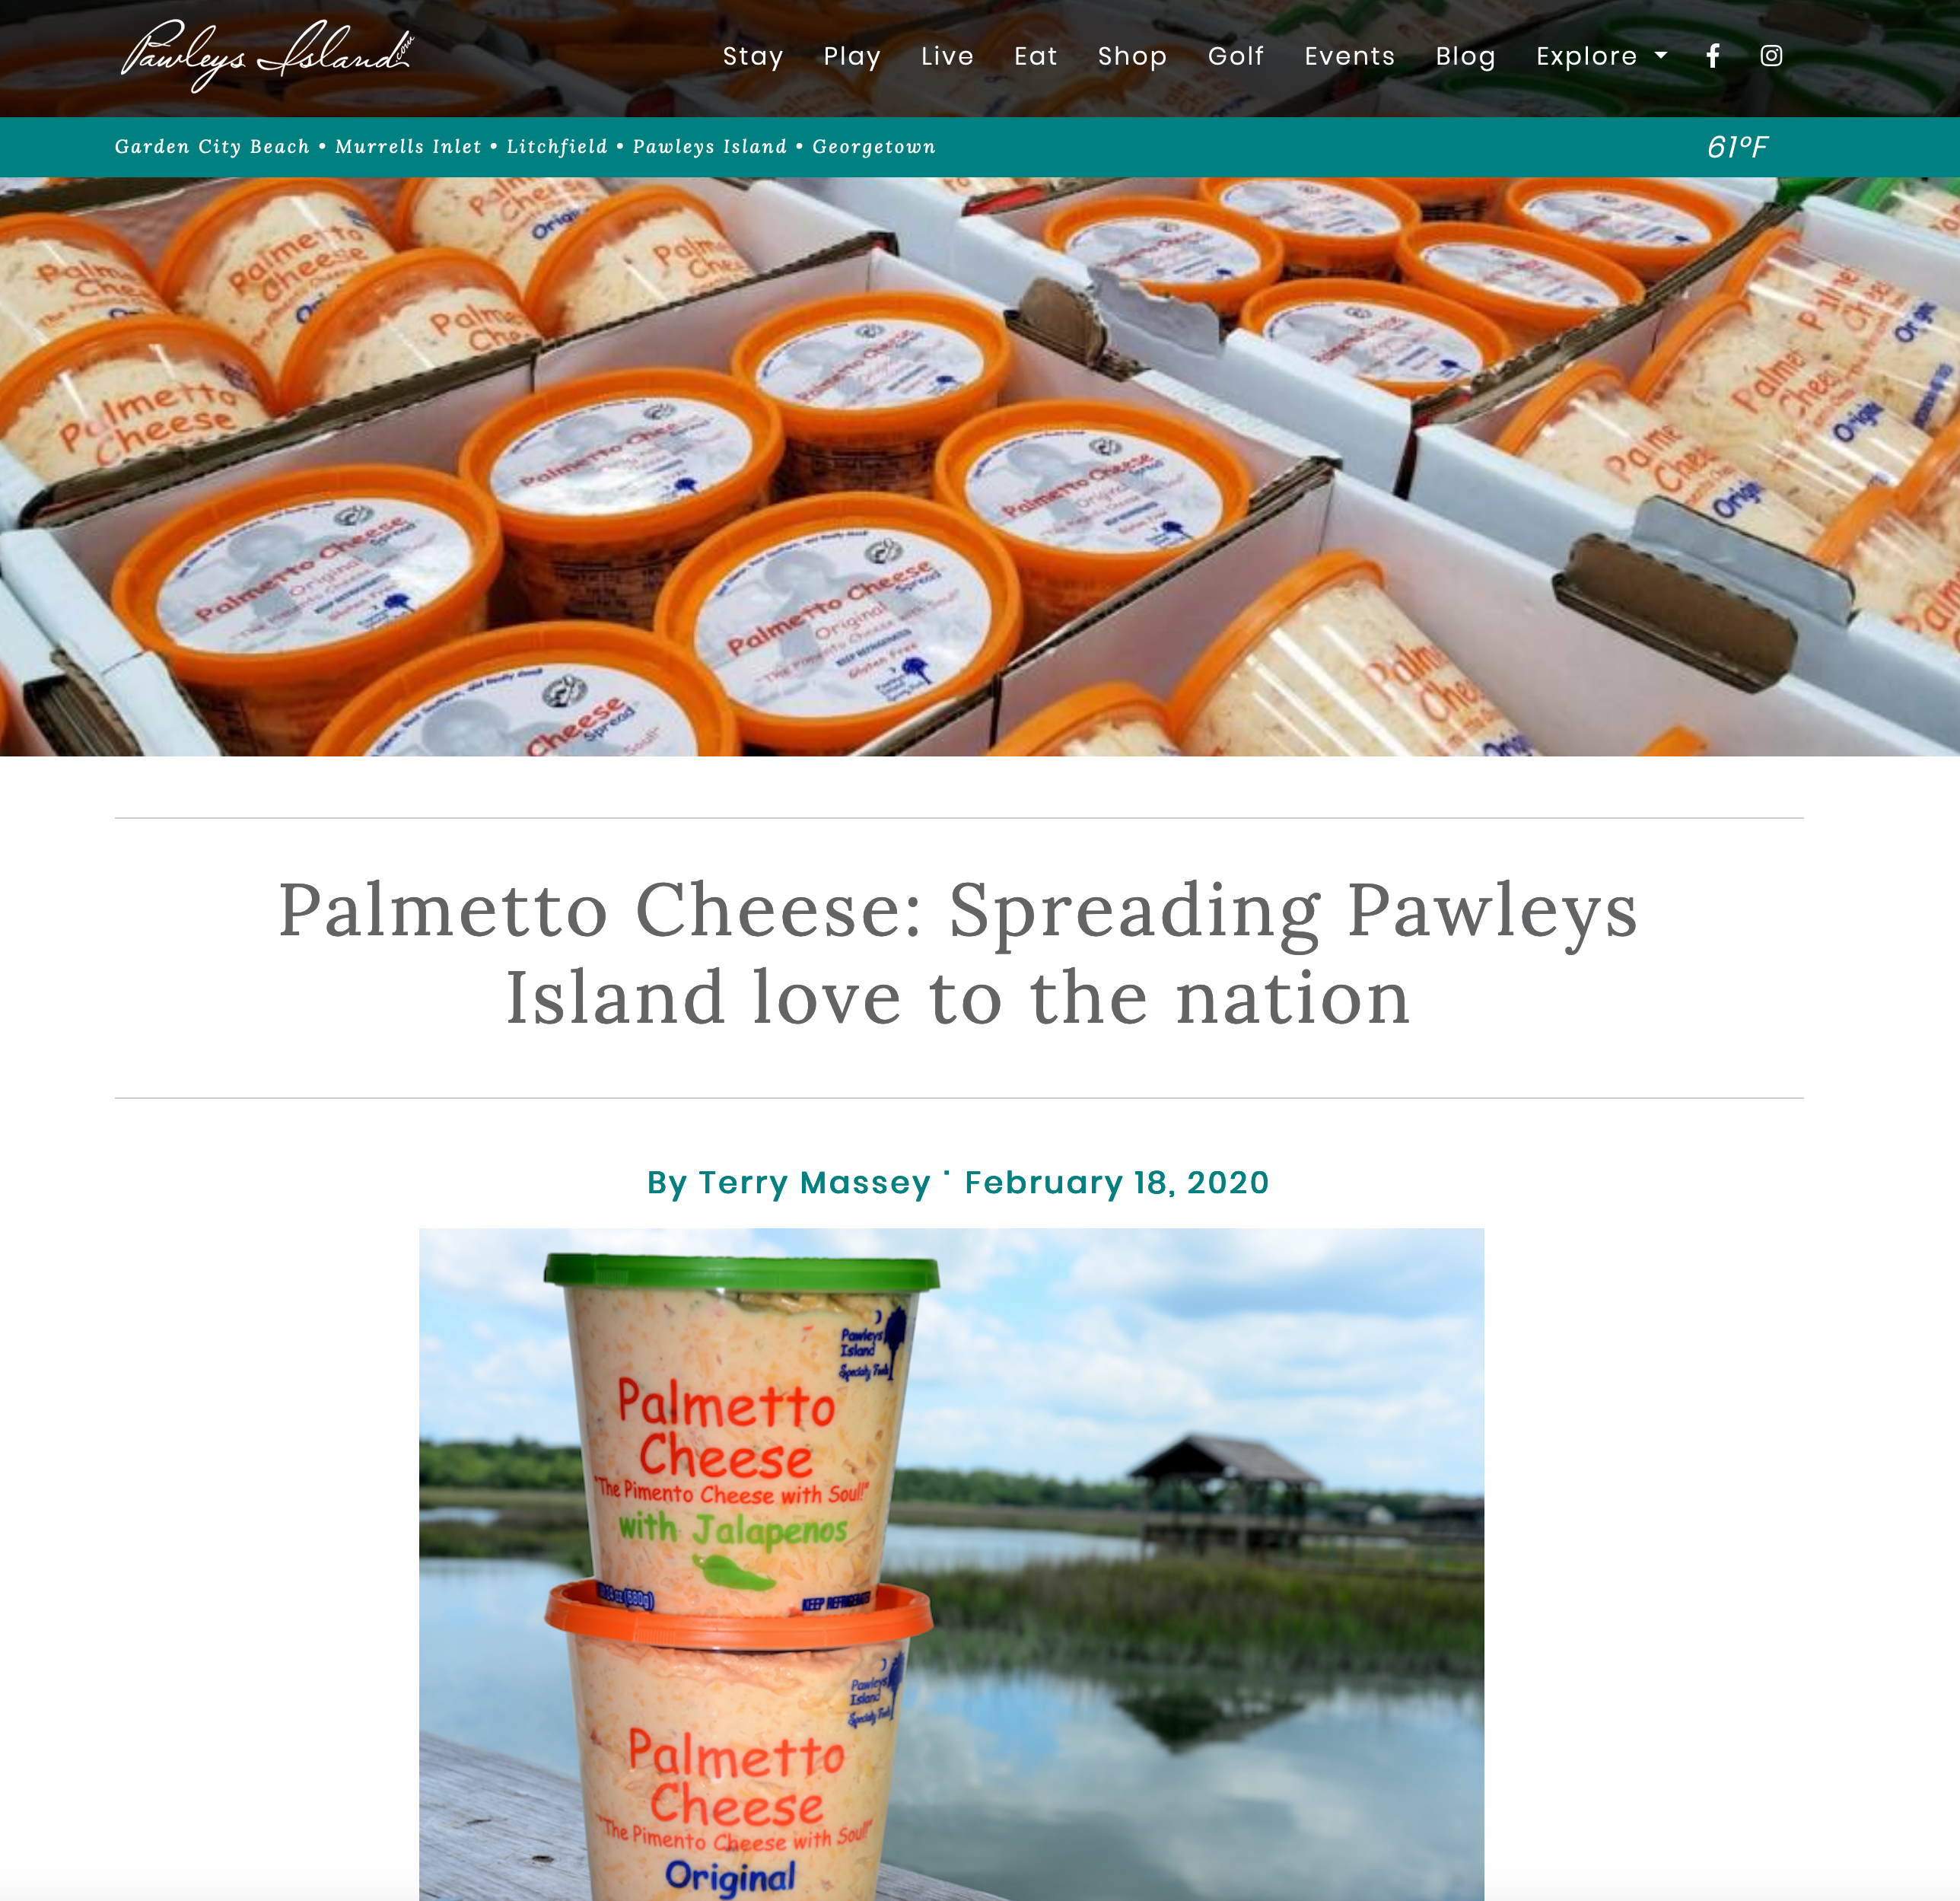 Palmetto Cheese: Spreading Pawleys Island love to the nation 